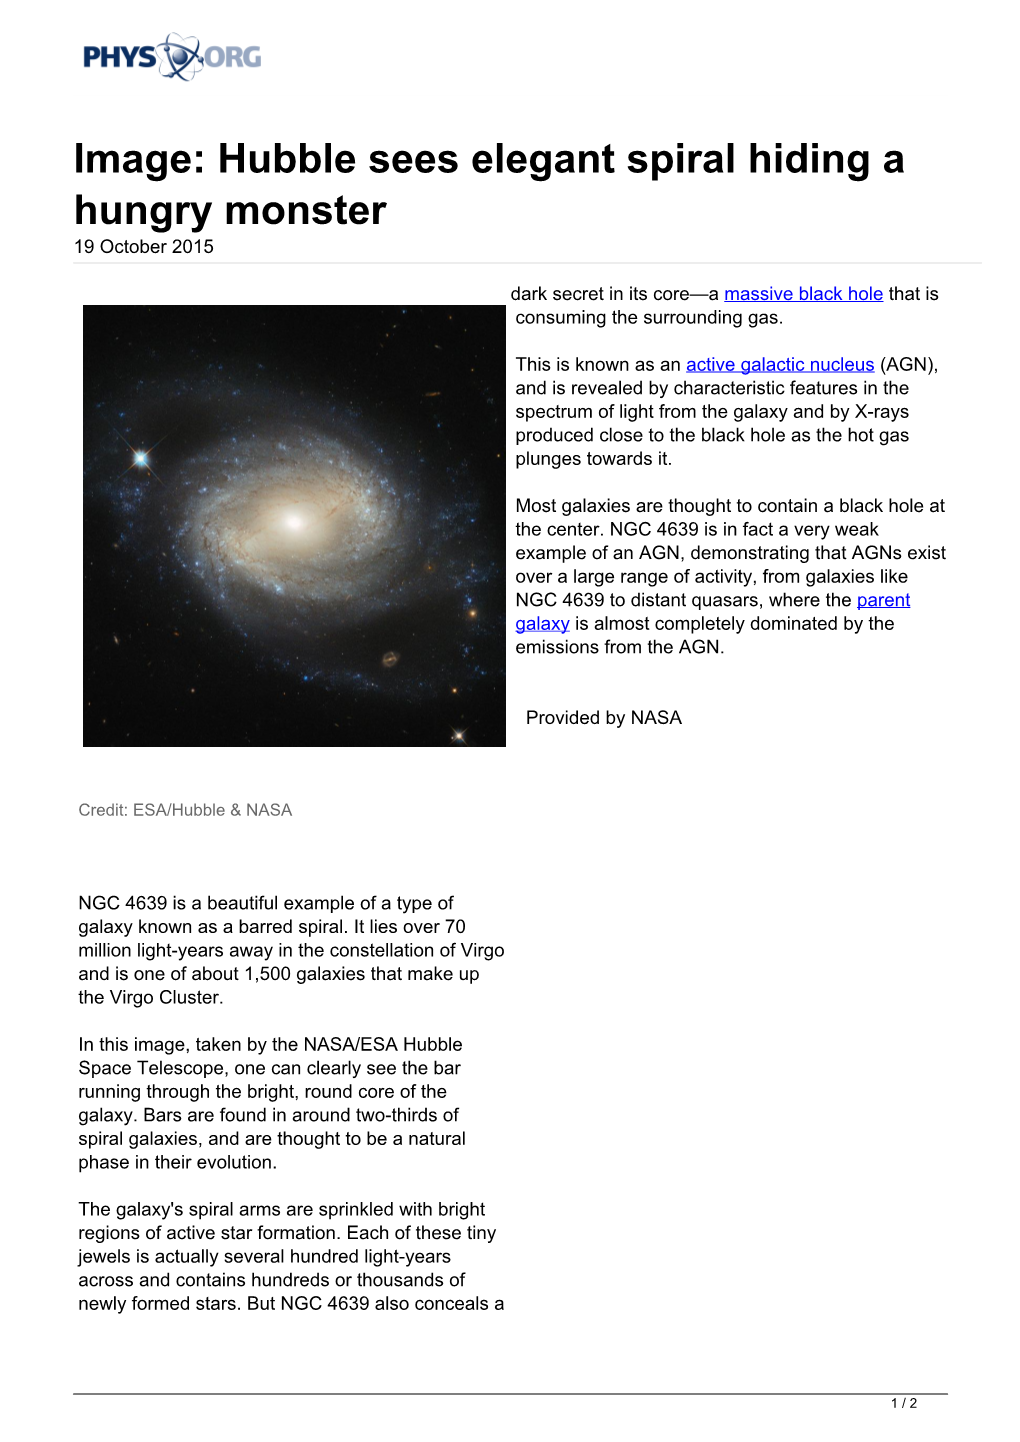 Hubble Sees Elegant Spiral Hiding a Hungry Monster 19 October 2015